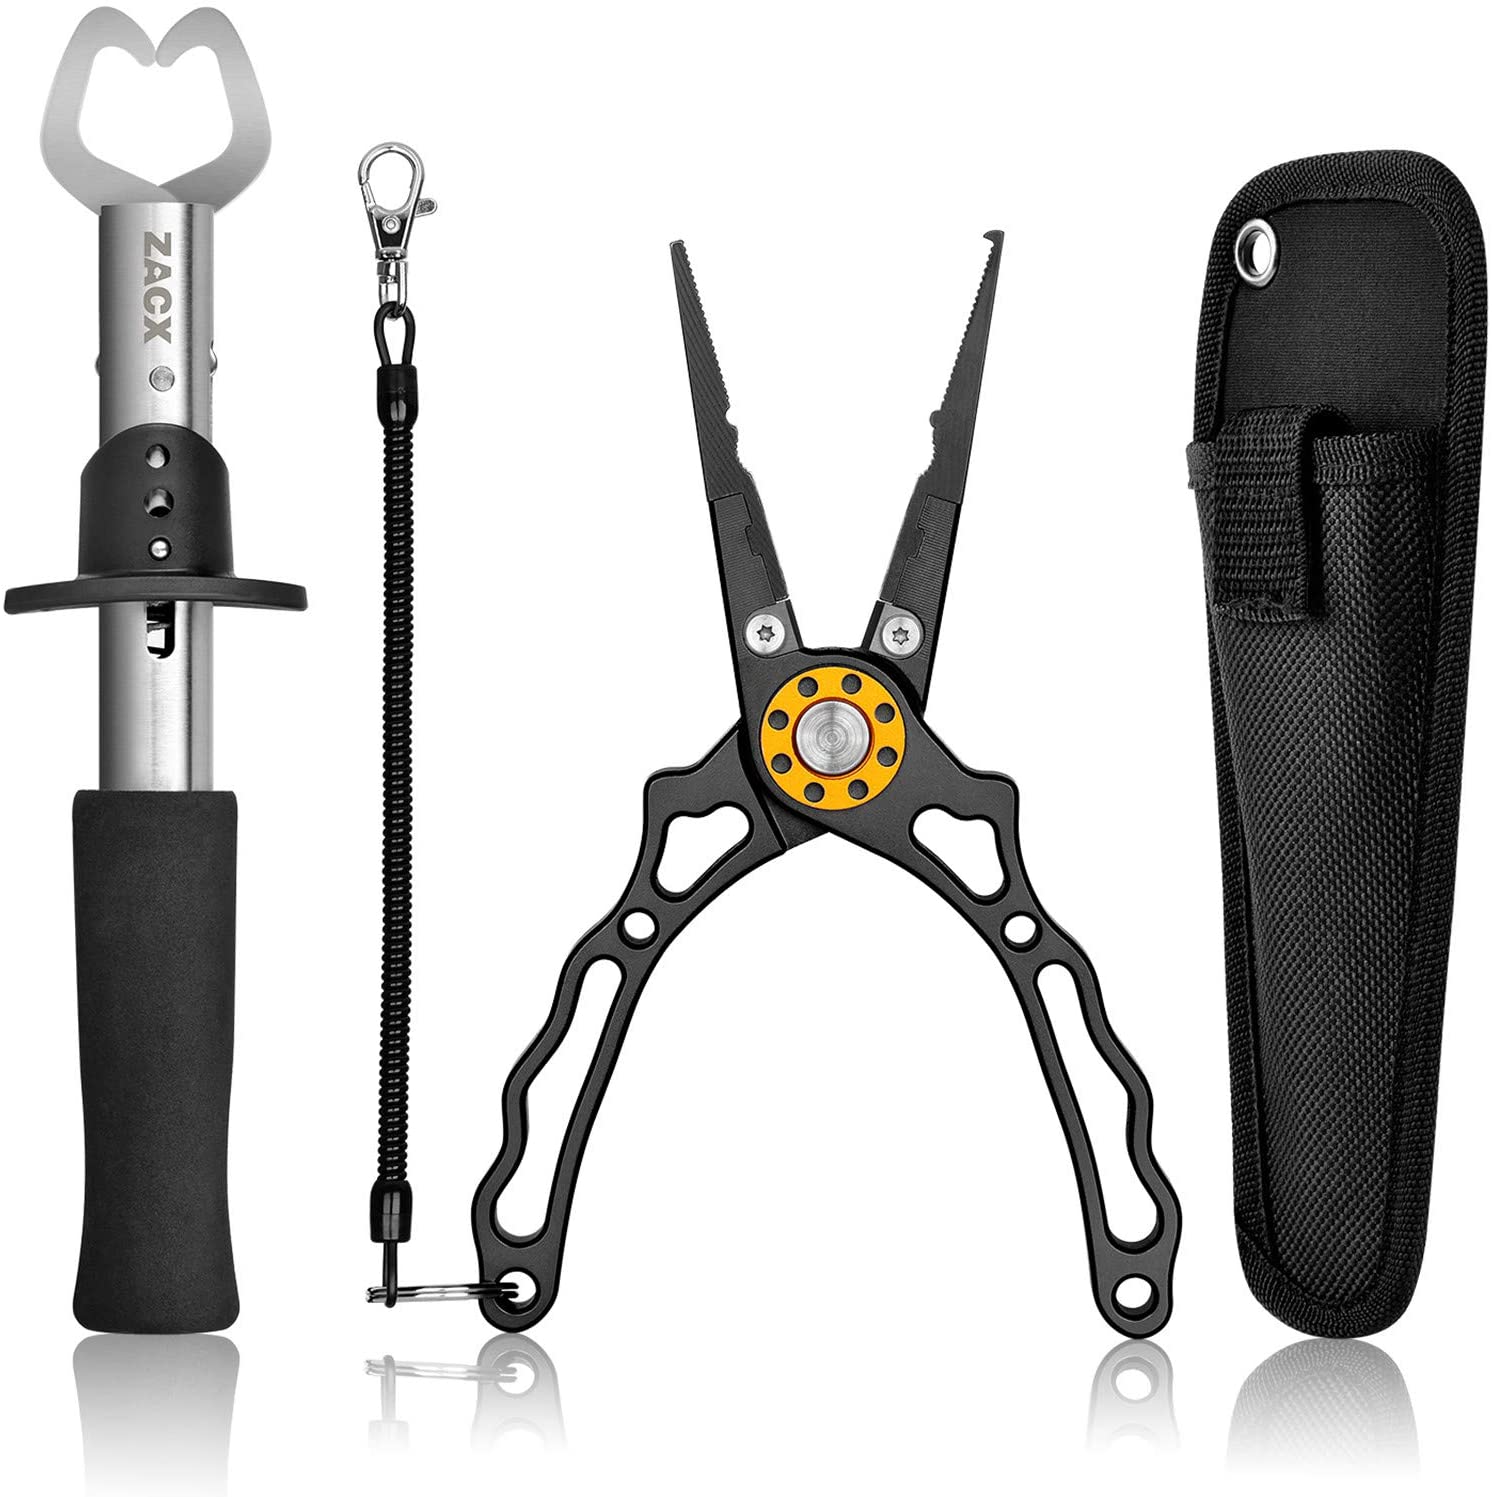 ZACX Fishing Pliers And Fish Lip Gripper | Christmas | Black Friday | Fathers Day | Birthday | Fisherman | Gift